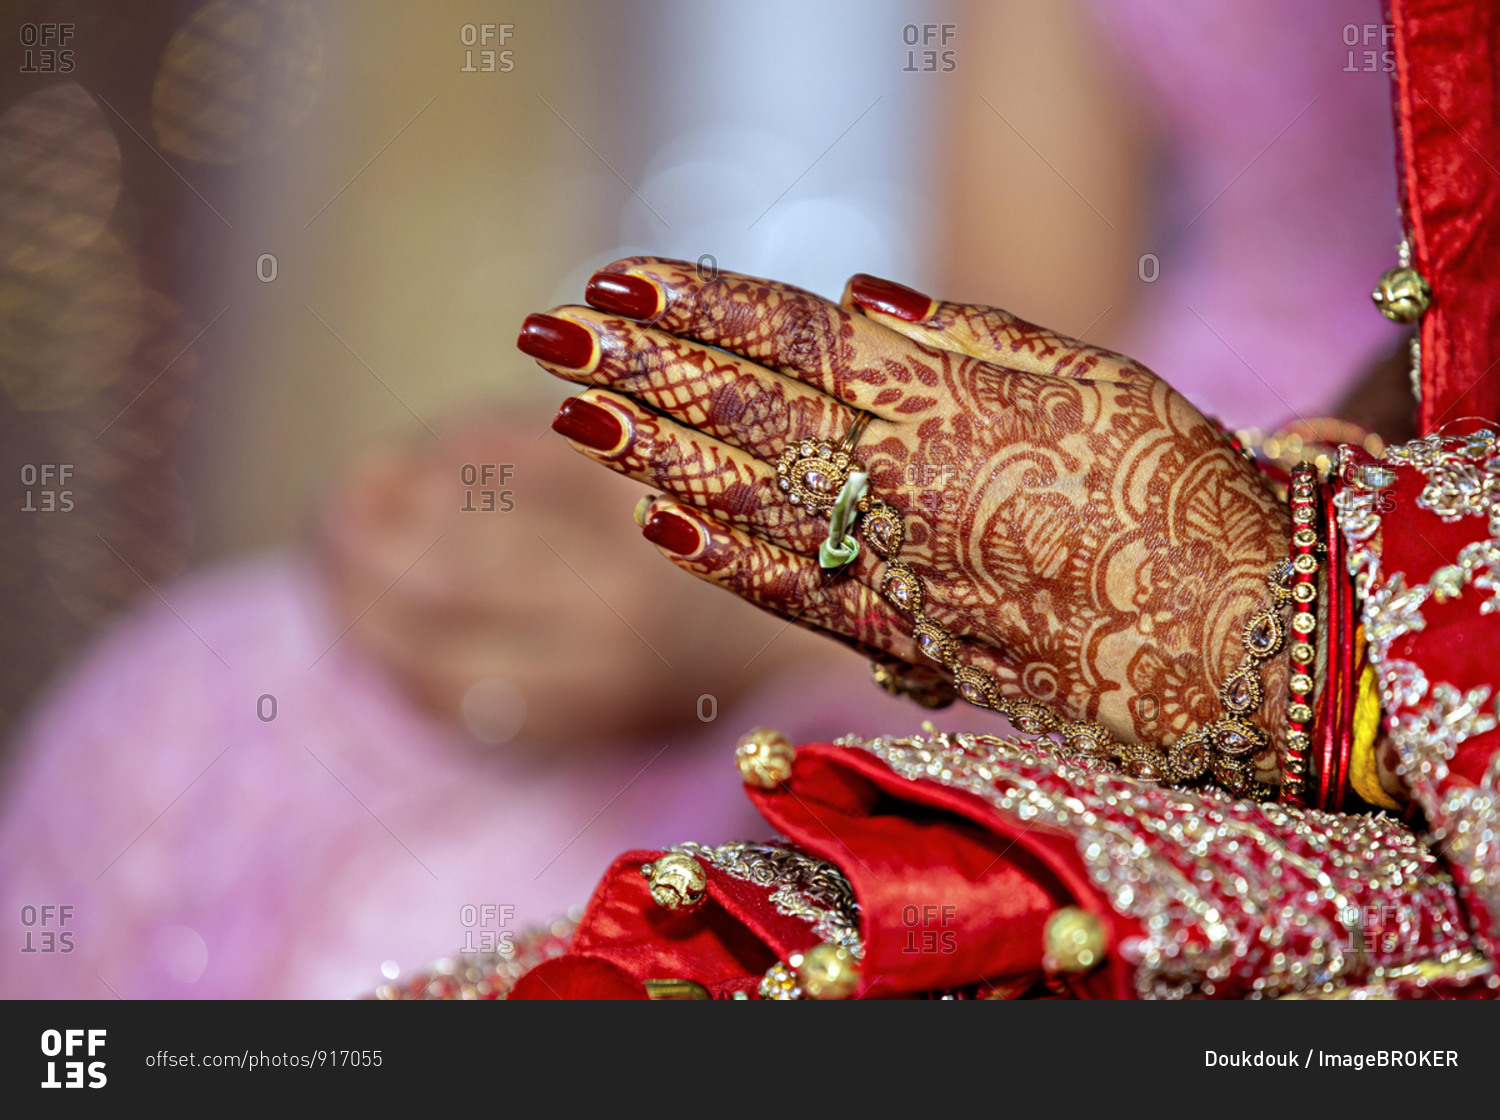 Traditional bridal jewelry and henna decoration on the hands of the bride during a religious ceremony at a Hindu wedding, Mauritius, Africa